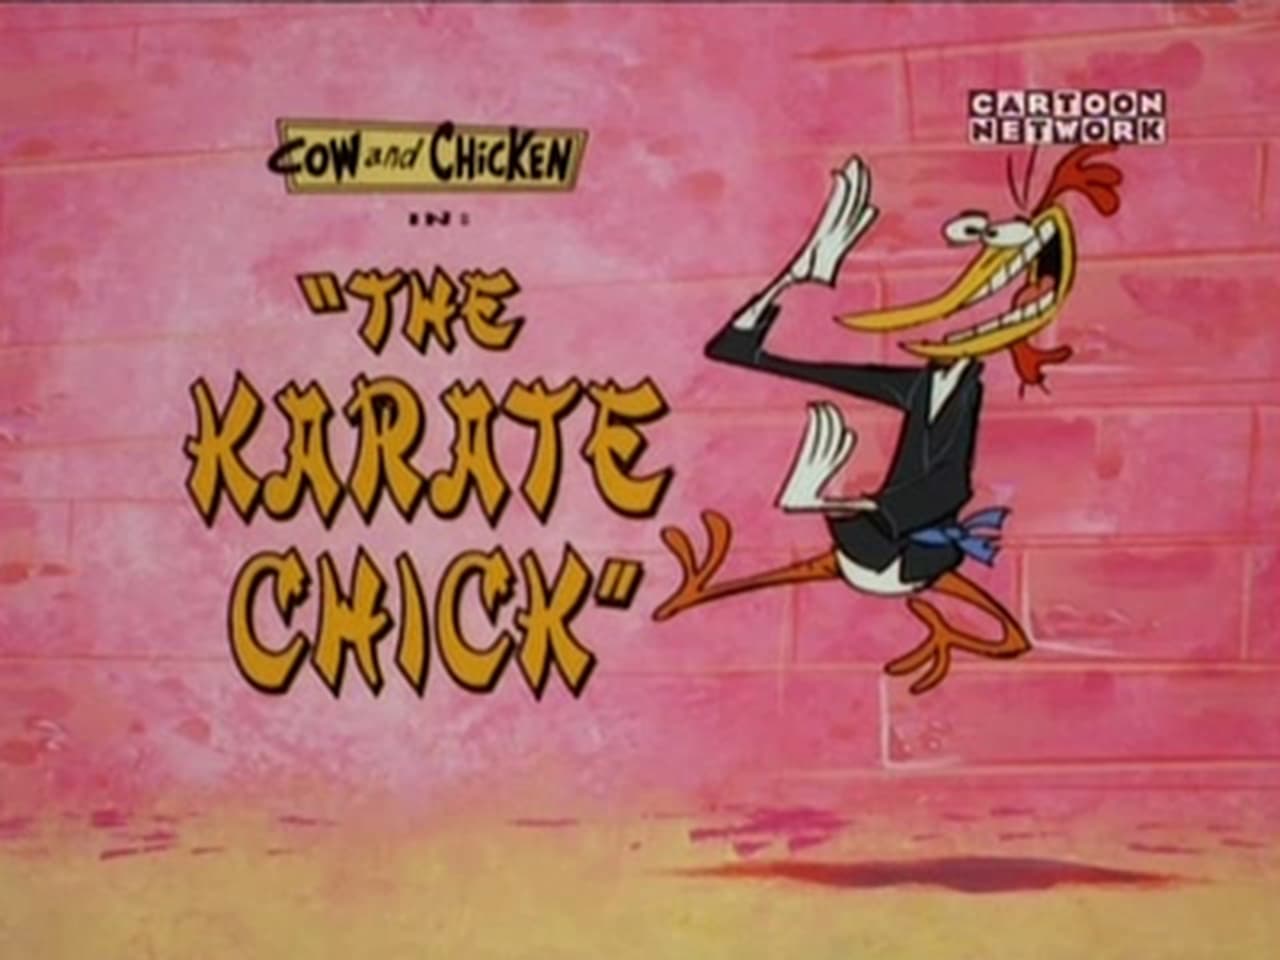 Cow and Chicken - Season 2 Episode 17 : The Karate Chick